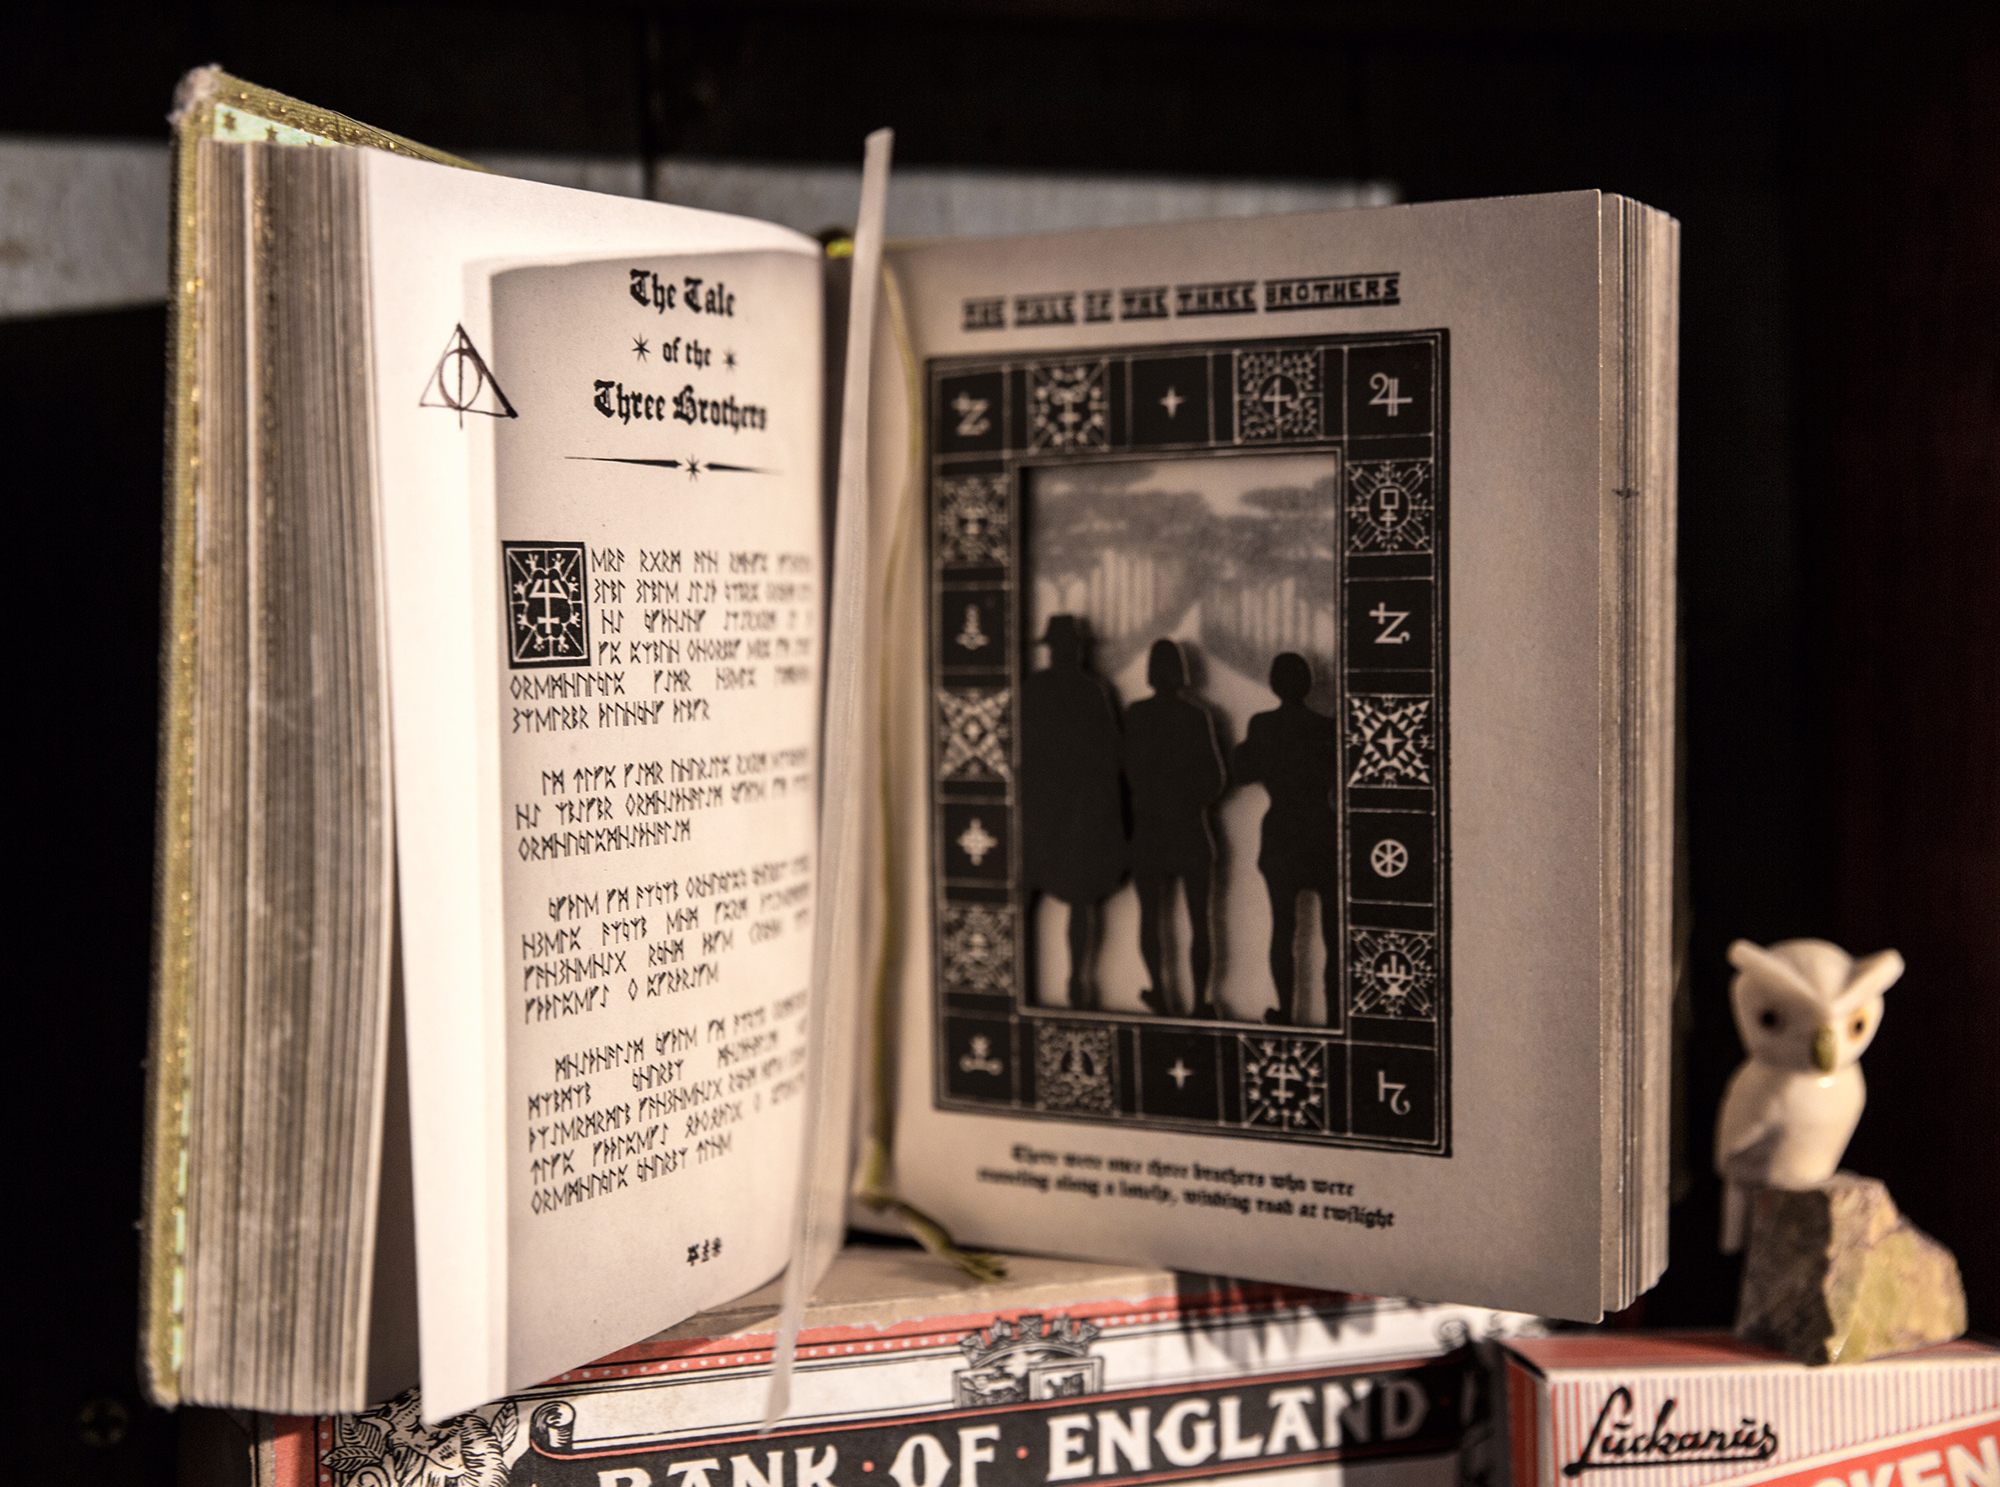 Our new book The Magic of MinaLima is divided in three volumes